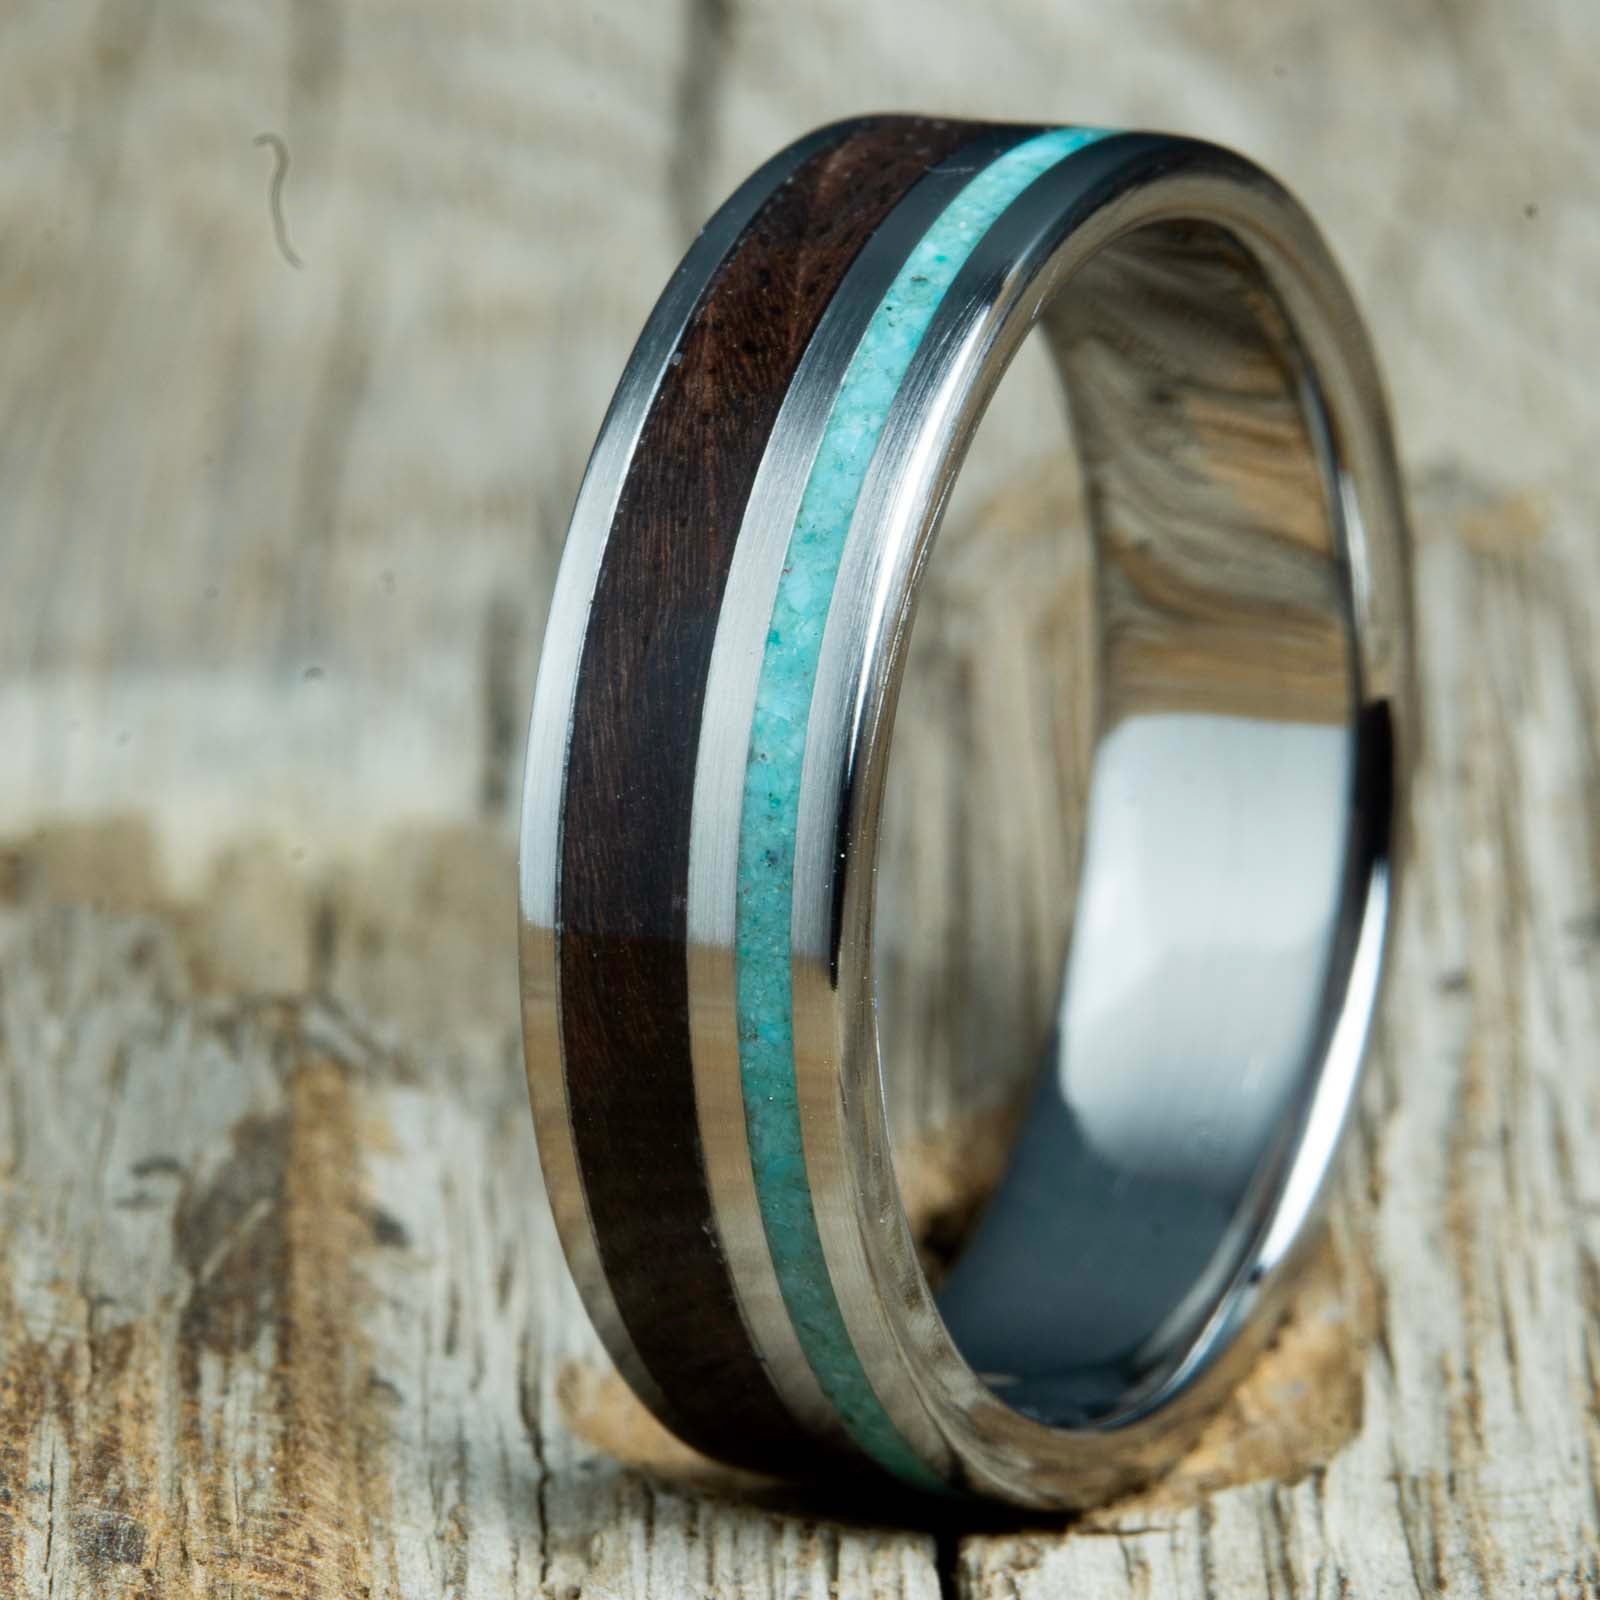 Walnut wood and single turquoise pinstripe inlay on polished titanium comfort fit ring core made by Peacefield Titanium